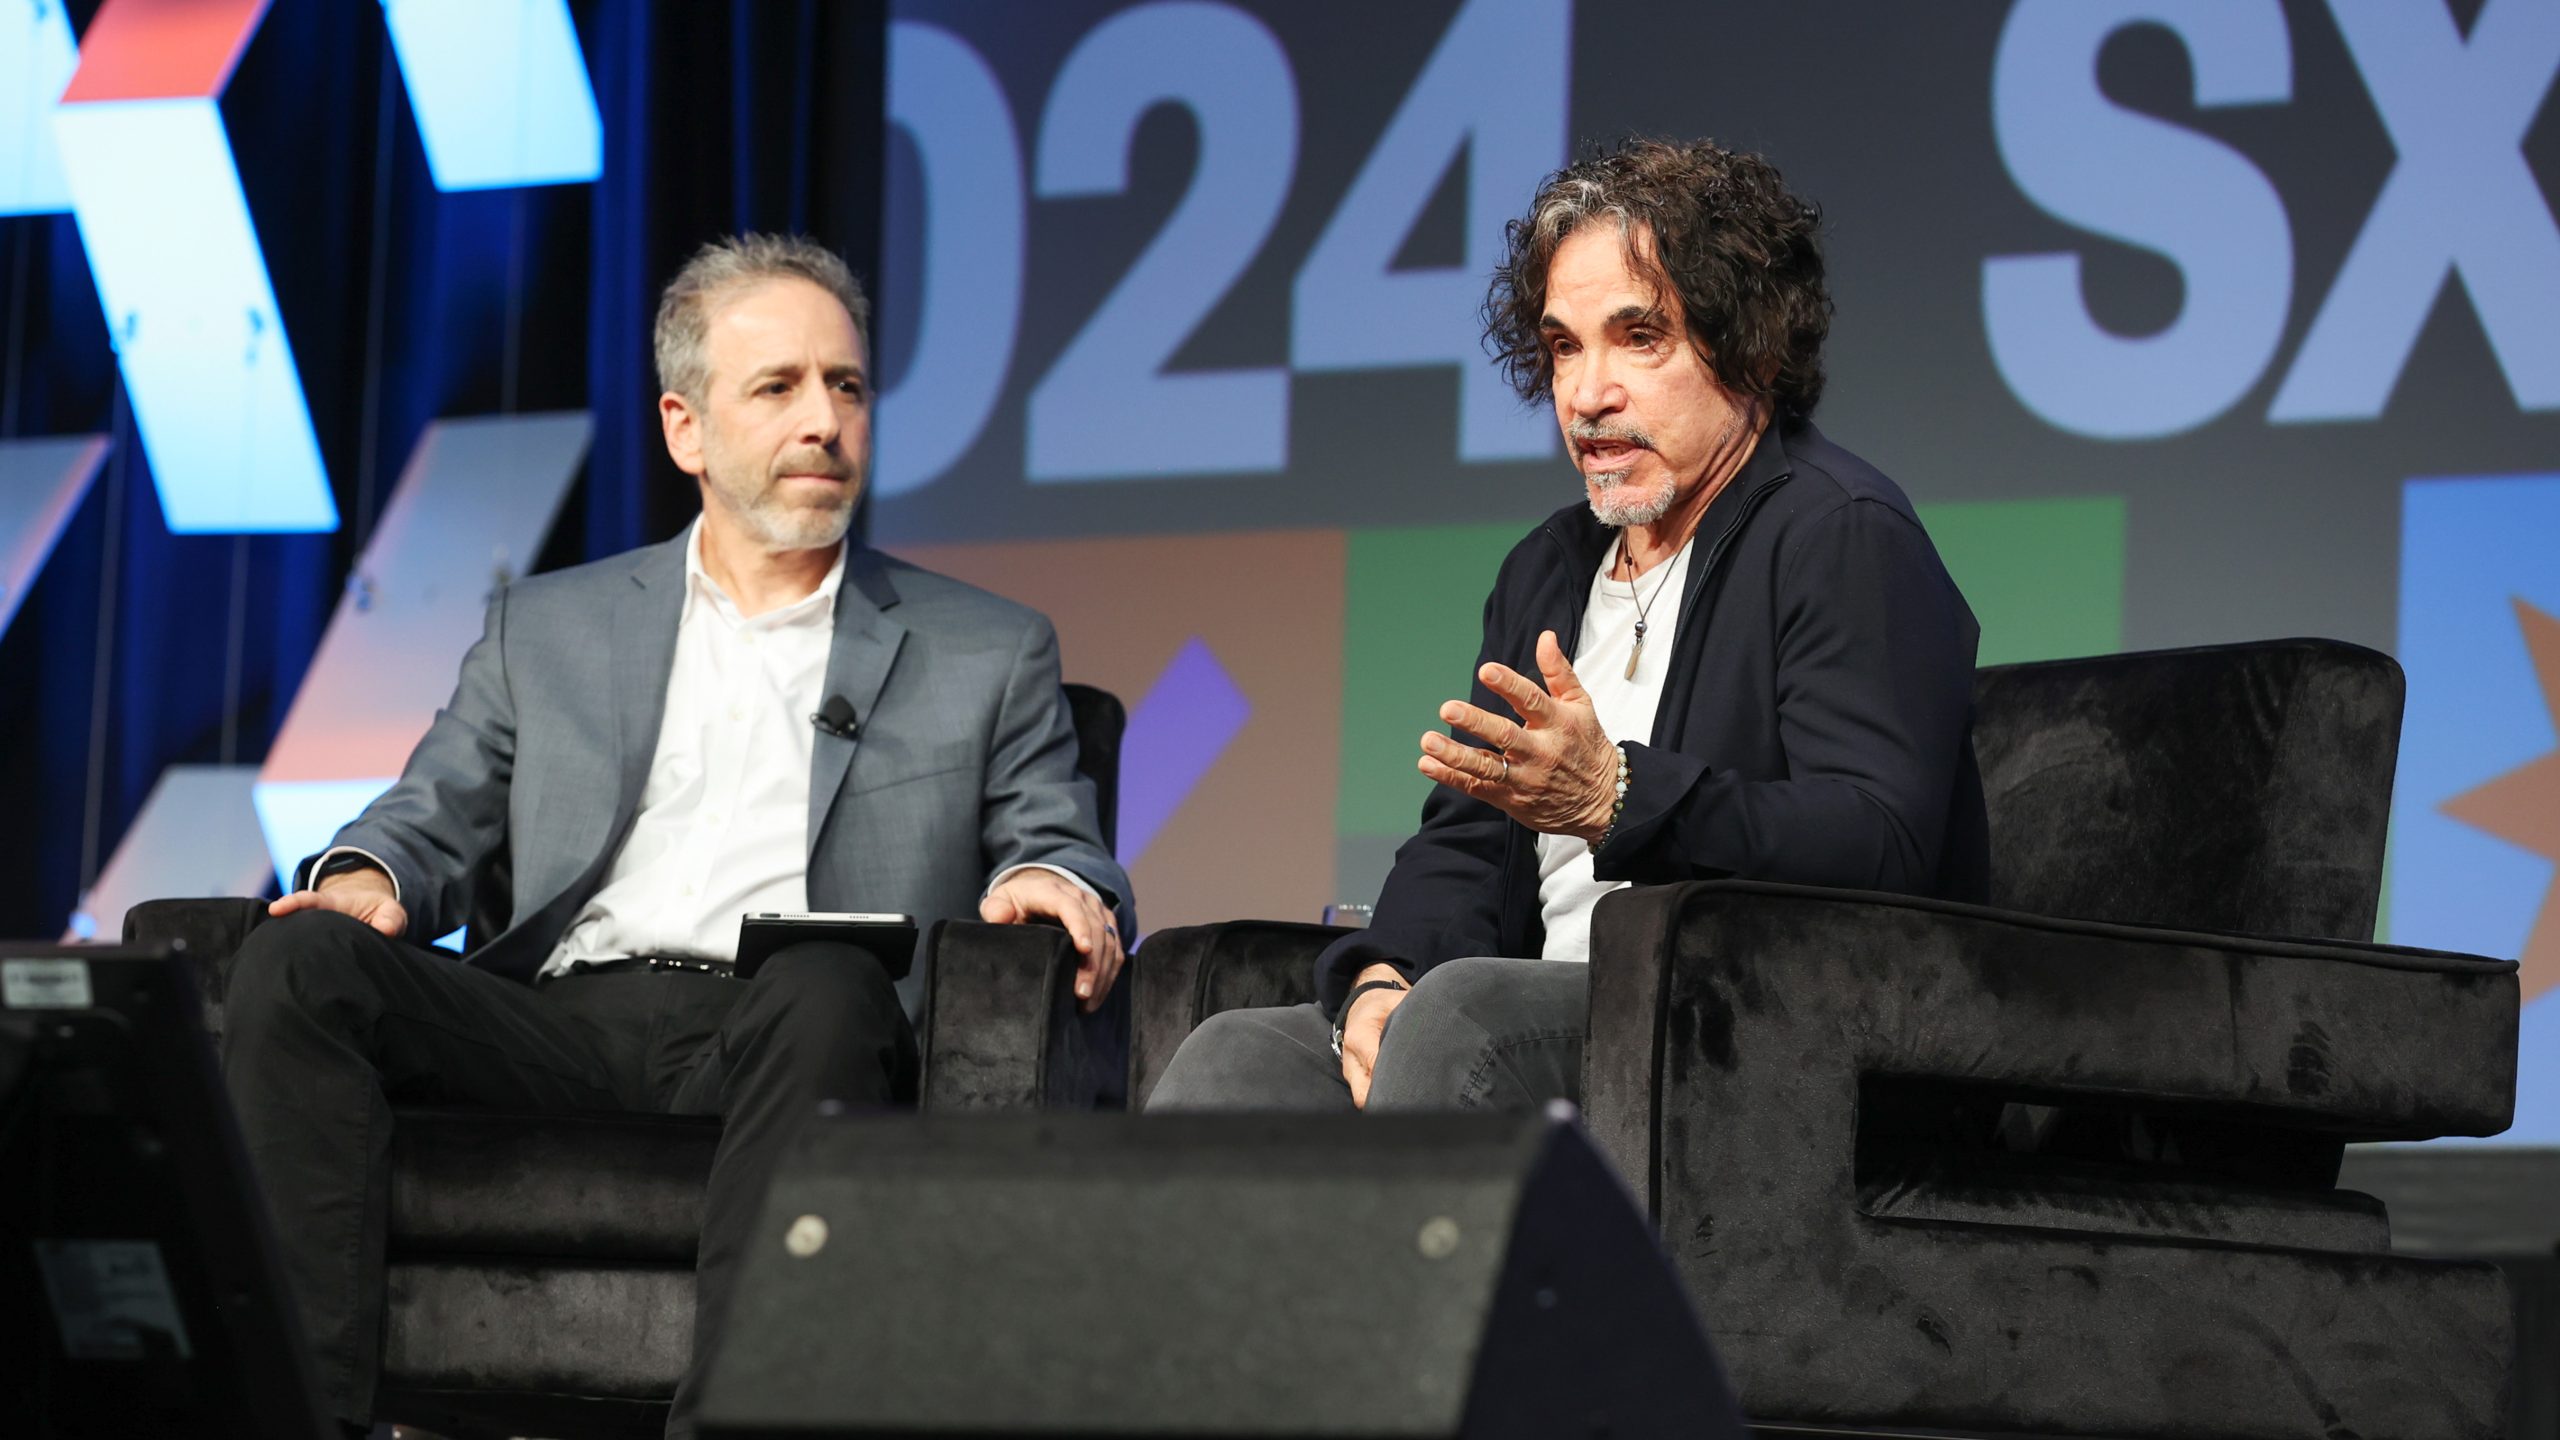 John Oates Talks Fame, Fortune, and Managing A Hit Music Career